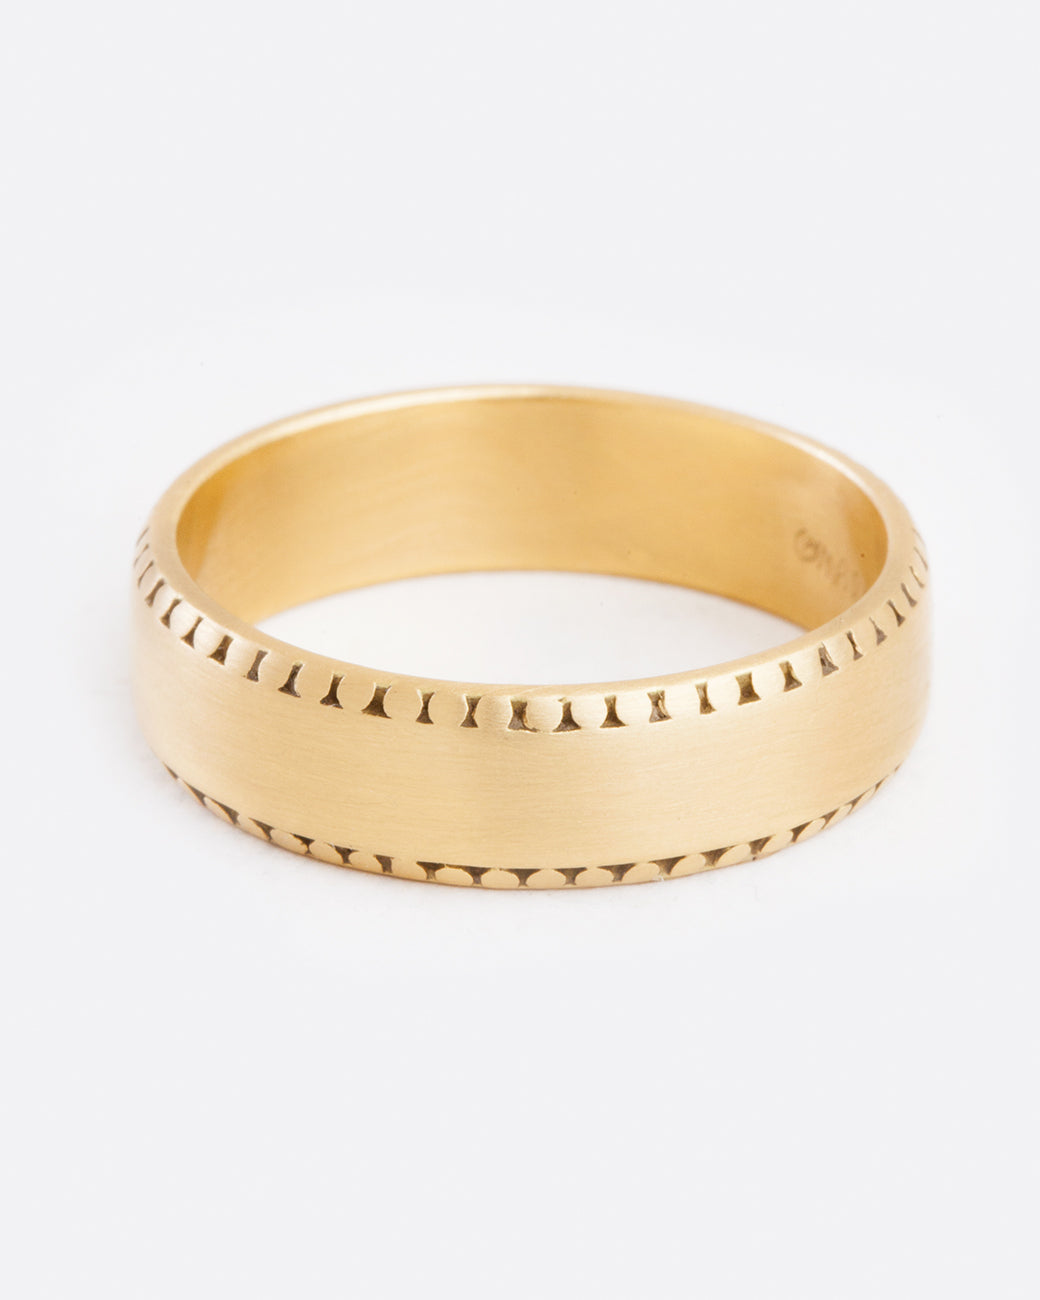 A front view of a yellow gold ring with a matte finish. The edges of the ring has light small dots around the top and bottom. They aren't super strong and almost look slightly worn away.